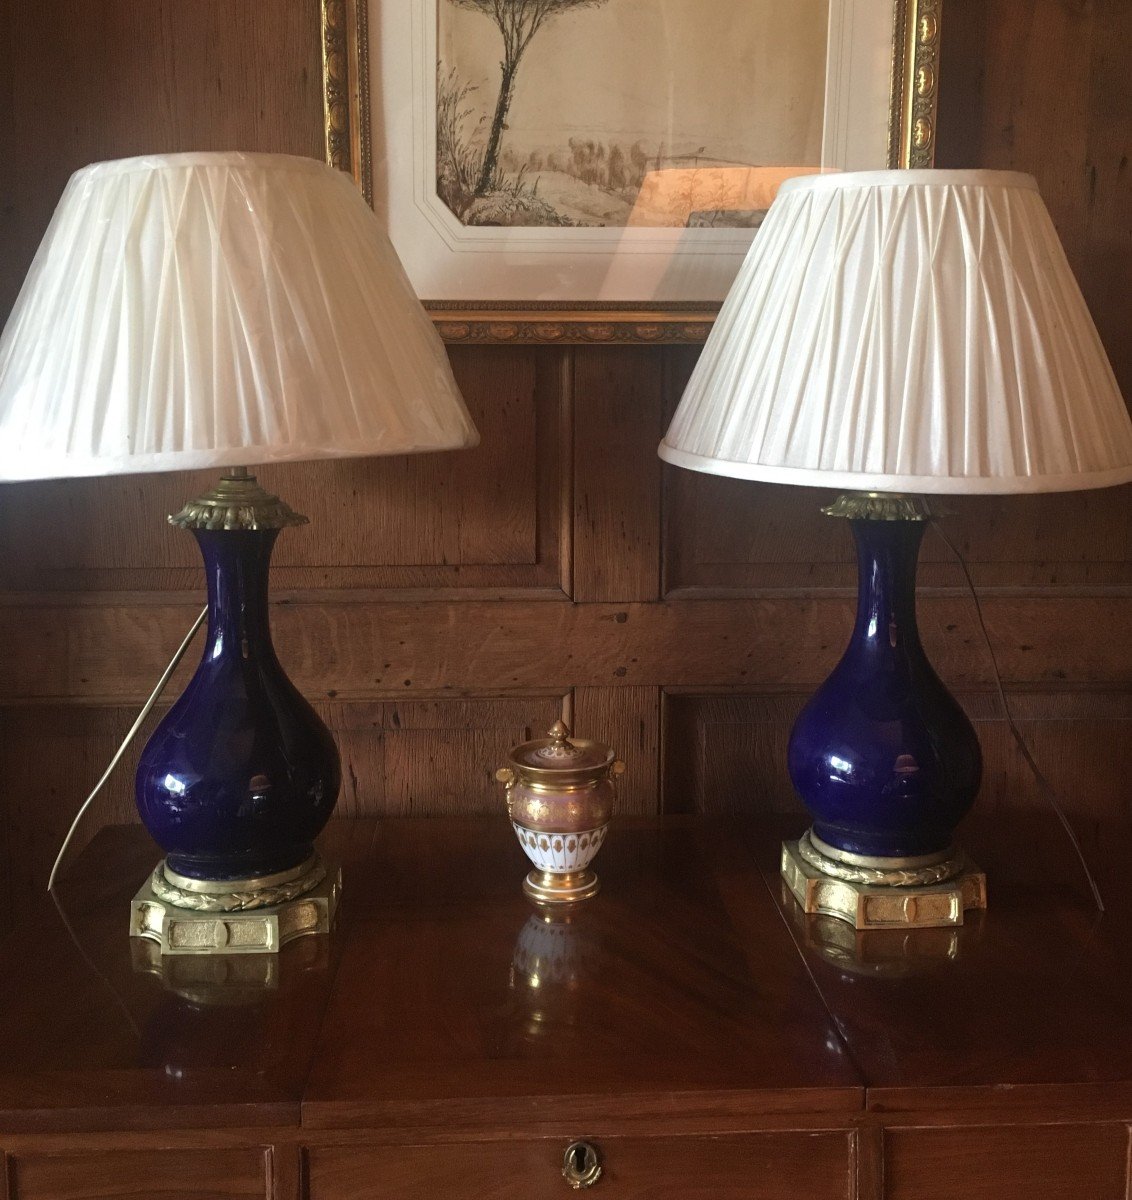 Pair Of Napoleon III Period Lamps In Sèvres Blue Porcelain And Bronze Mounts.